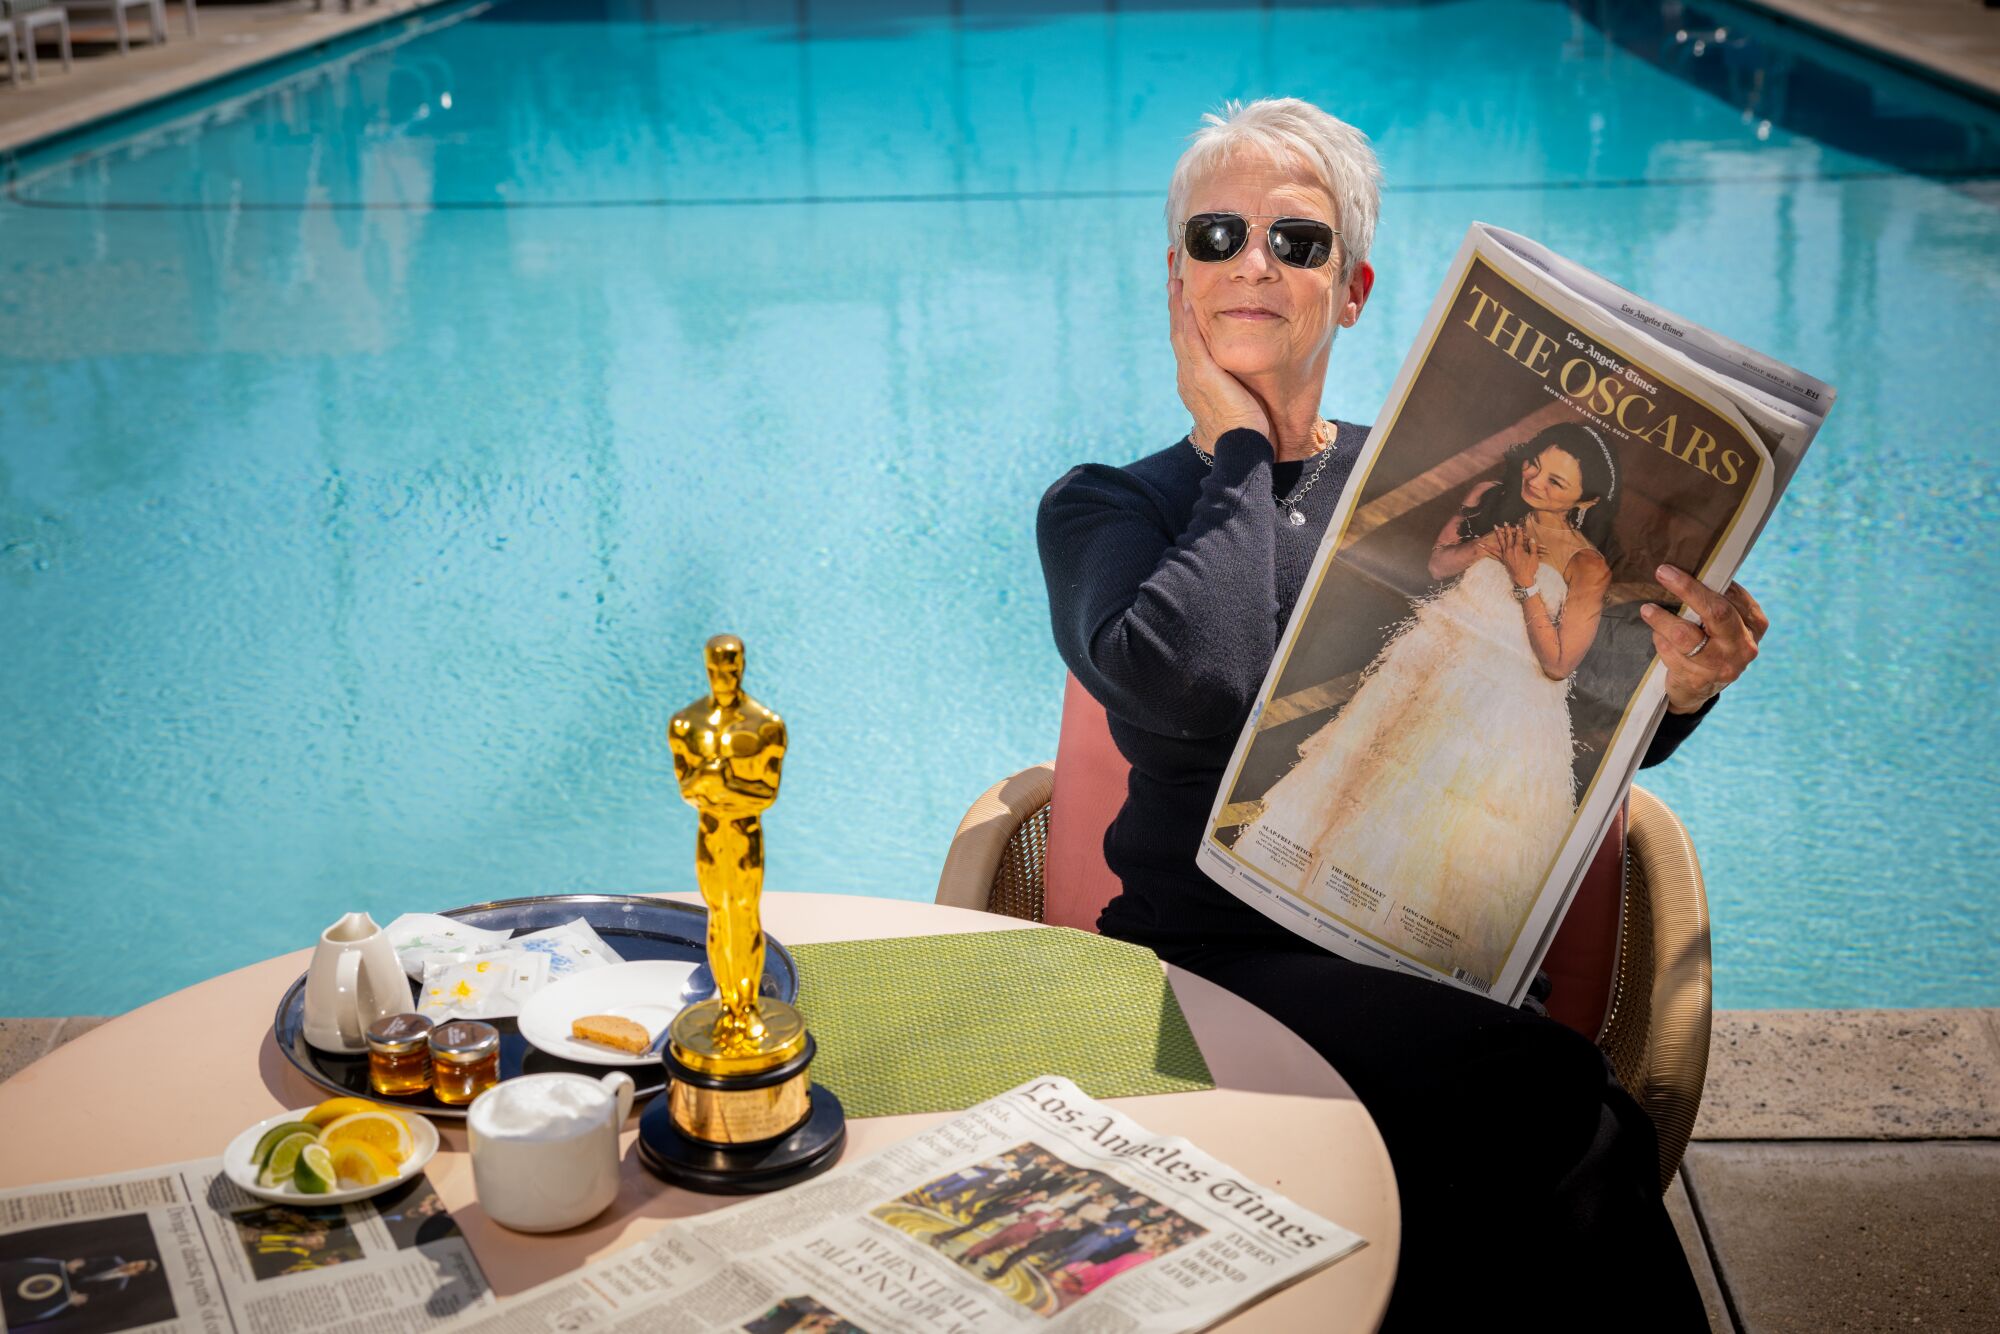 A woman in sunglasses holds a newspaper clipping next to a table on which her Oscar is written.